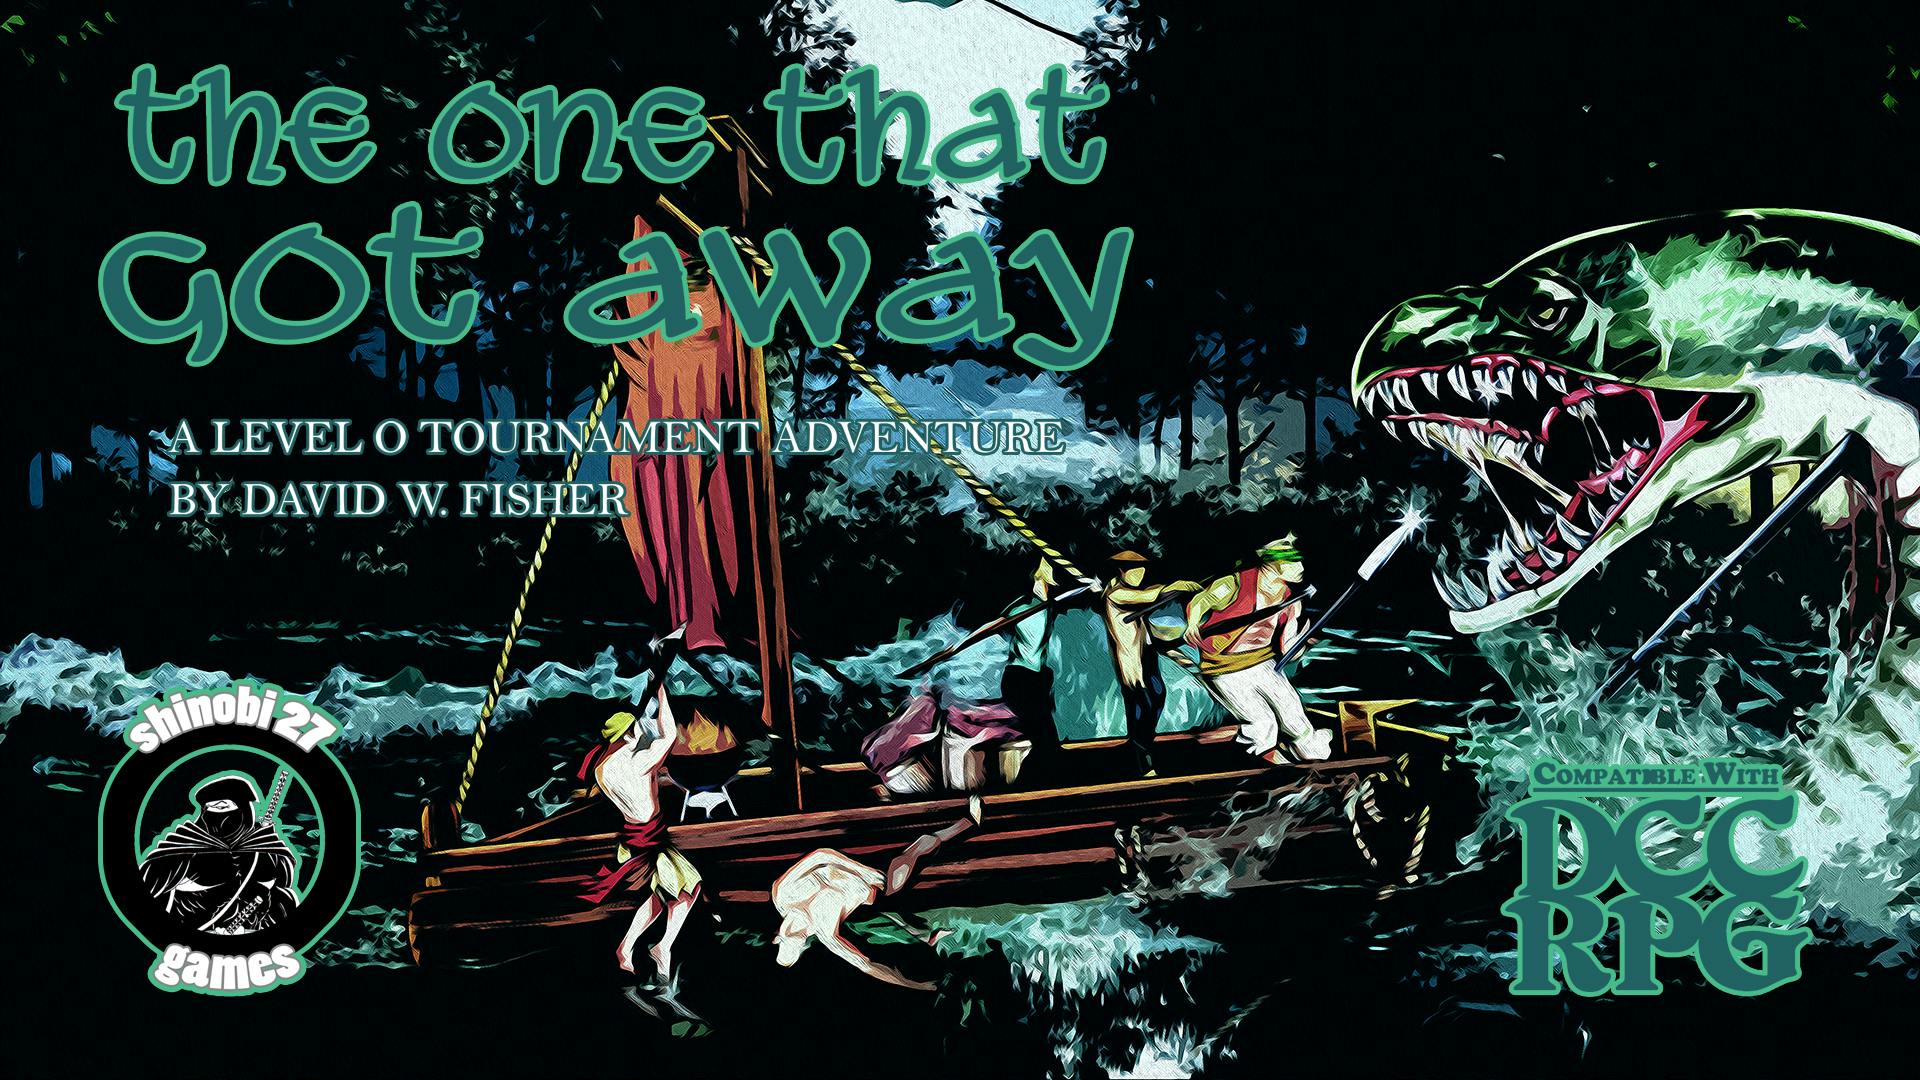 The One That Got Away - A zero level tournament funnel adventure. Let's go fishing!